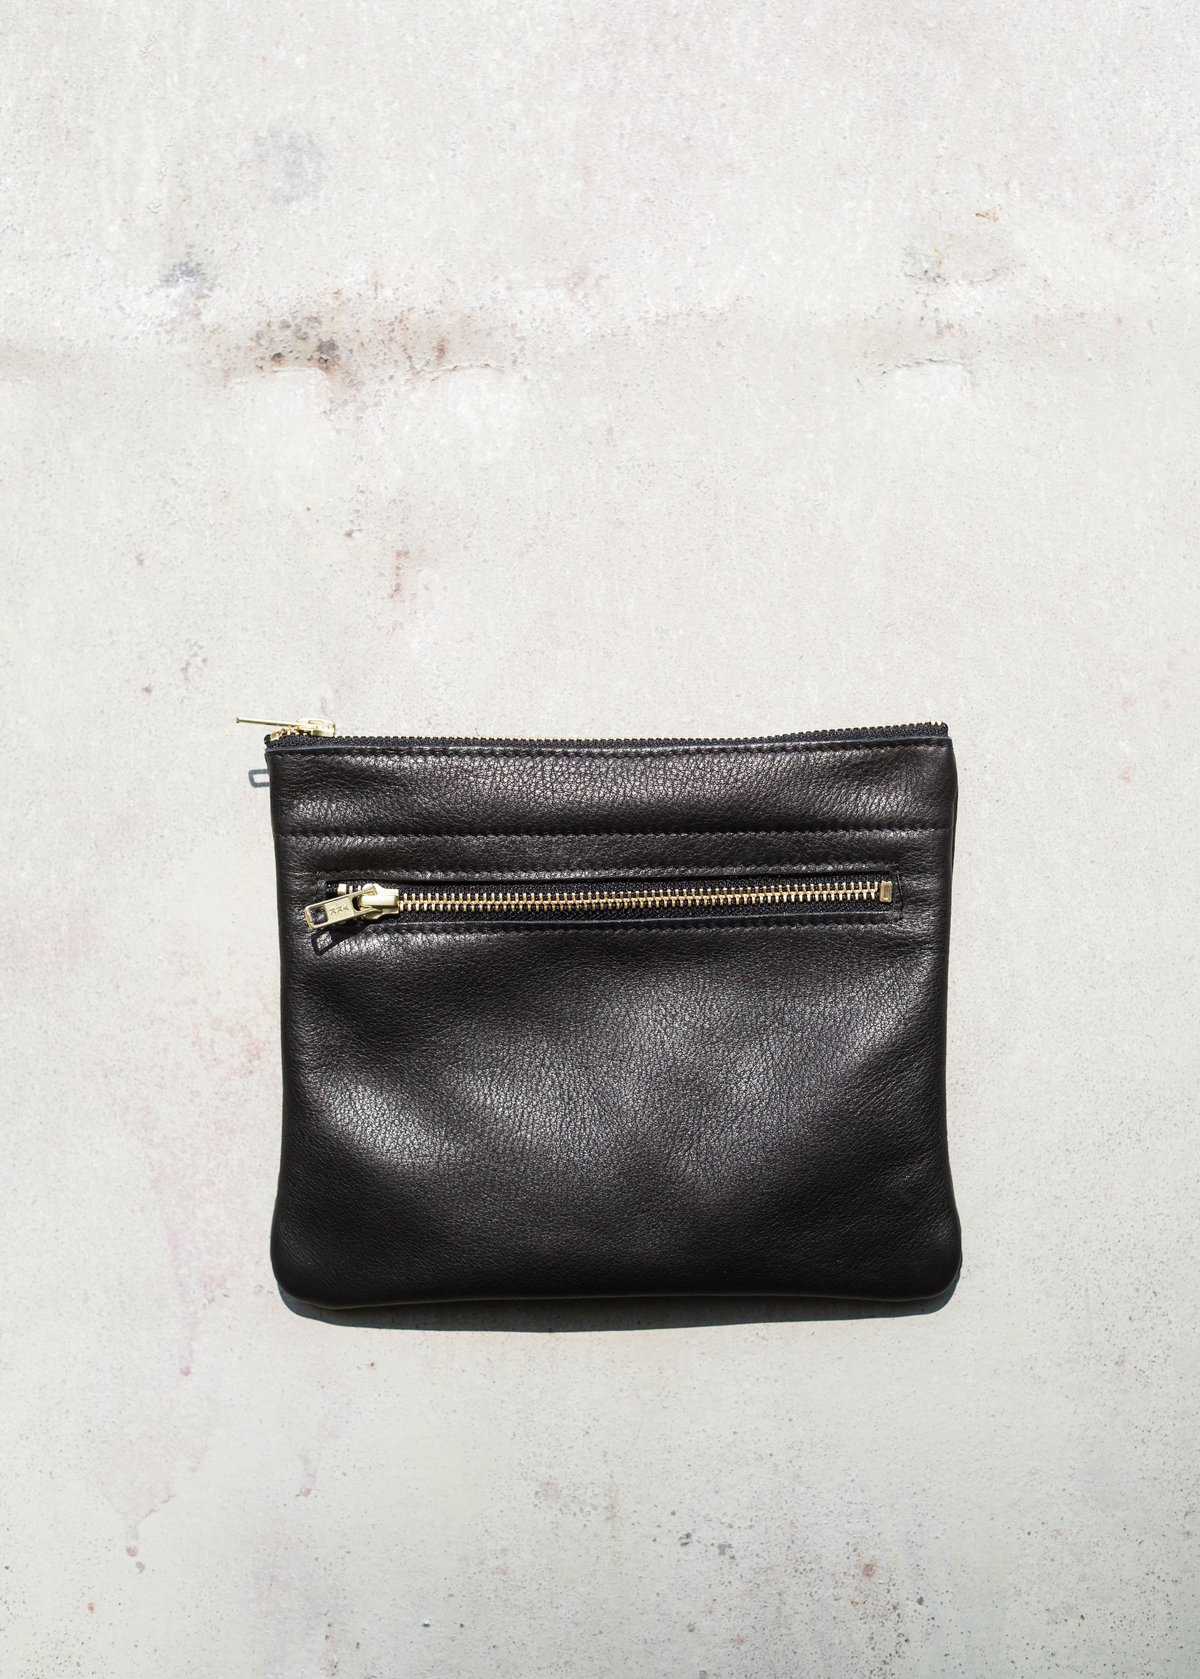 Image of Leather Clutch or travel pouch